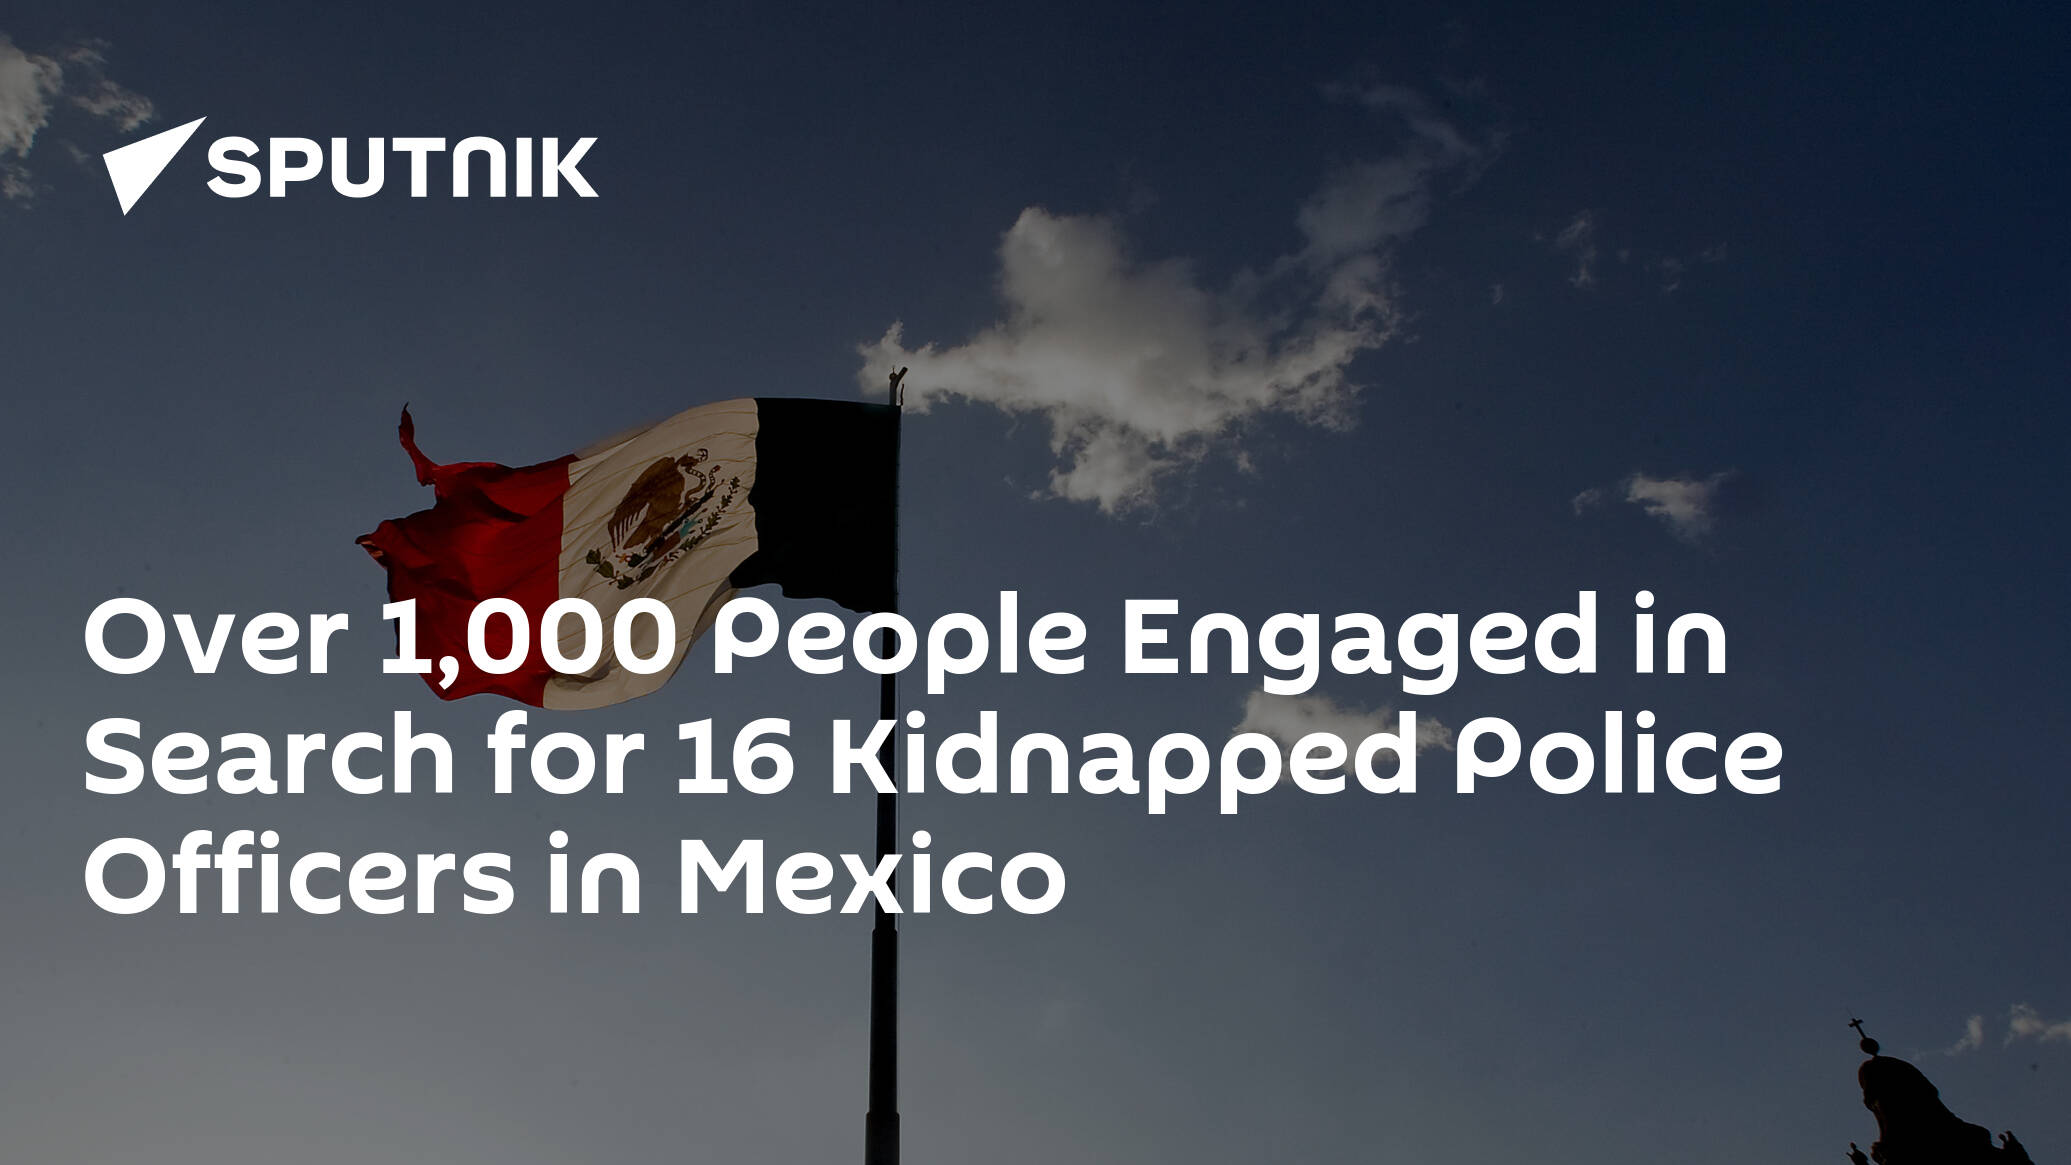 Over 1,000 People Engaged in Search for 16 Kidnapped Police Officers in Mexico